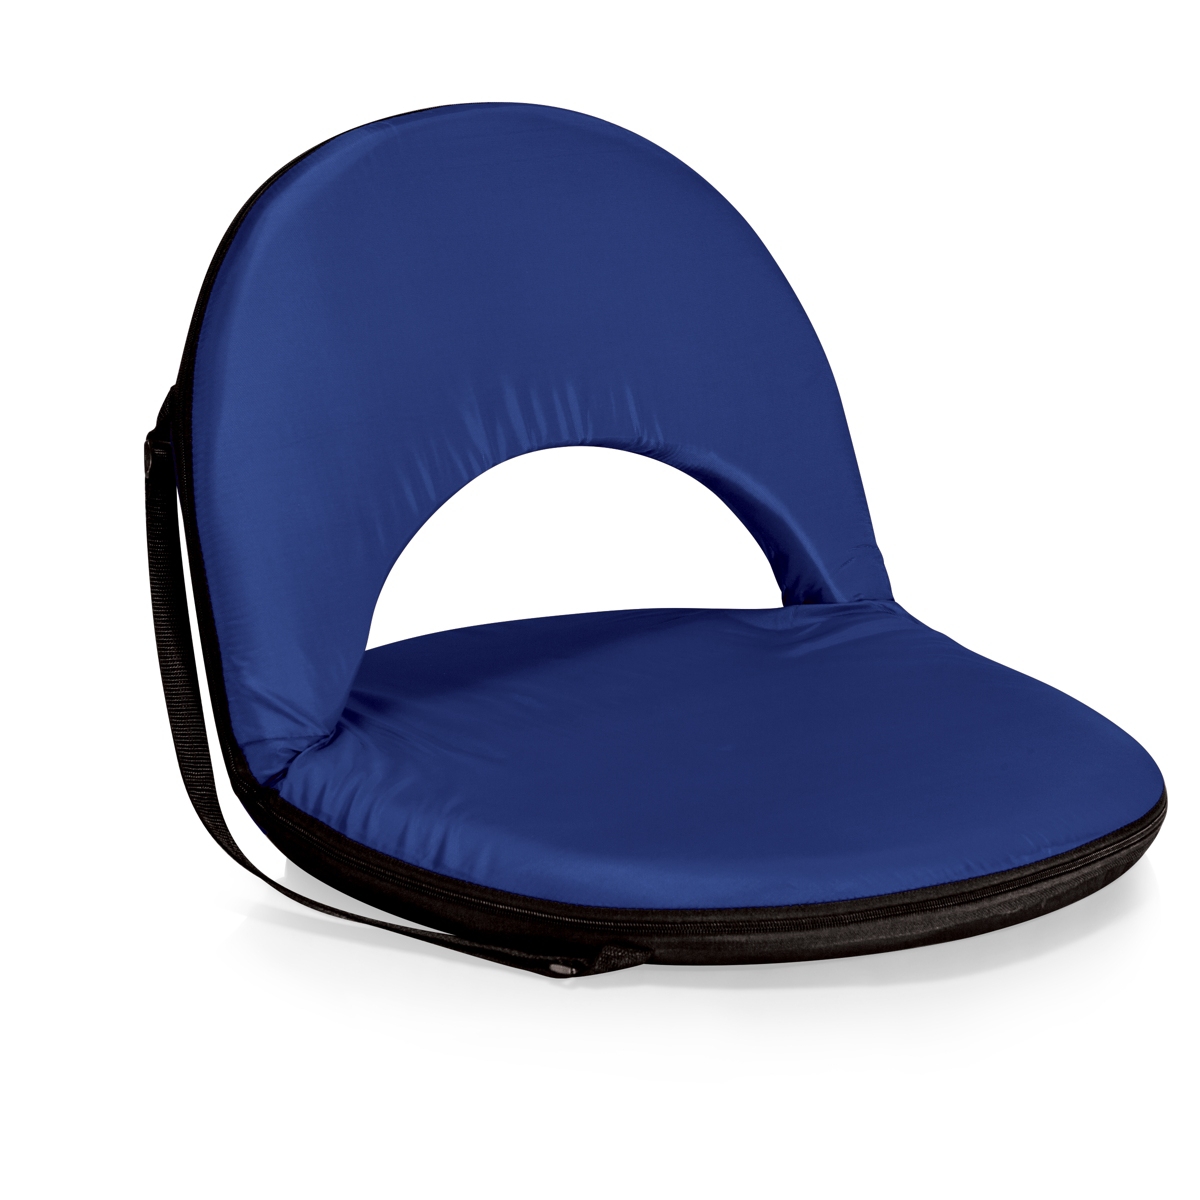 by Picnic Time Oniva Portable Reclining Seat - Navy